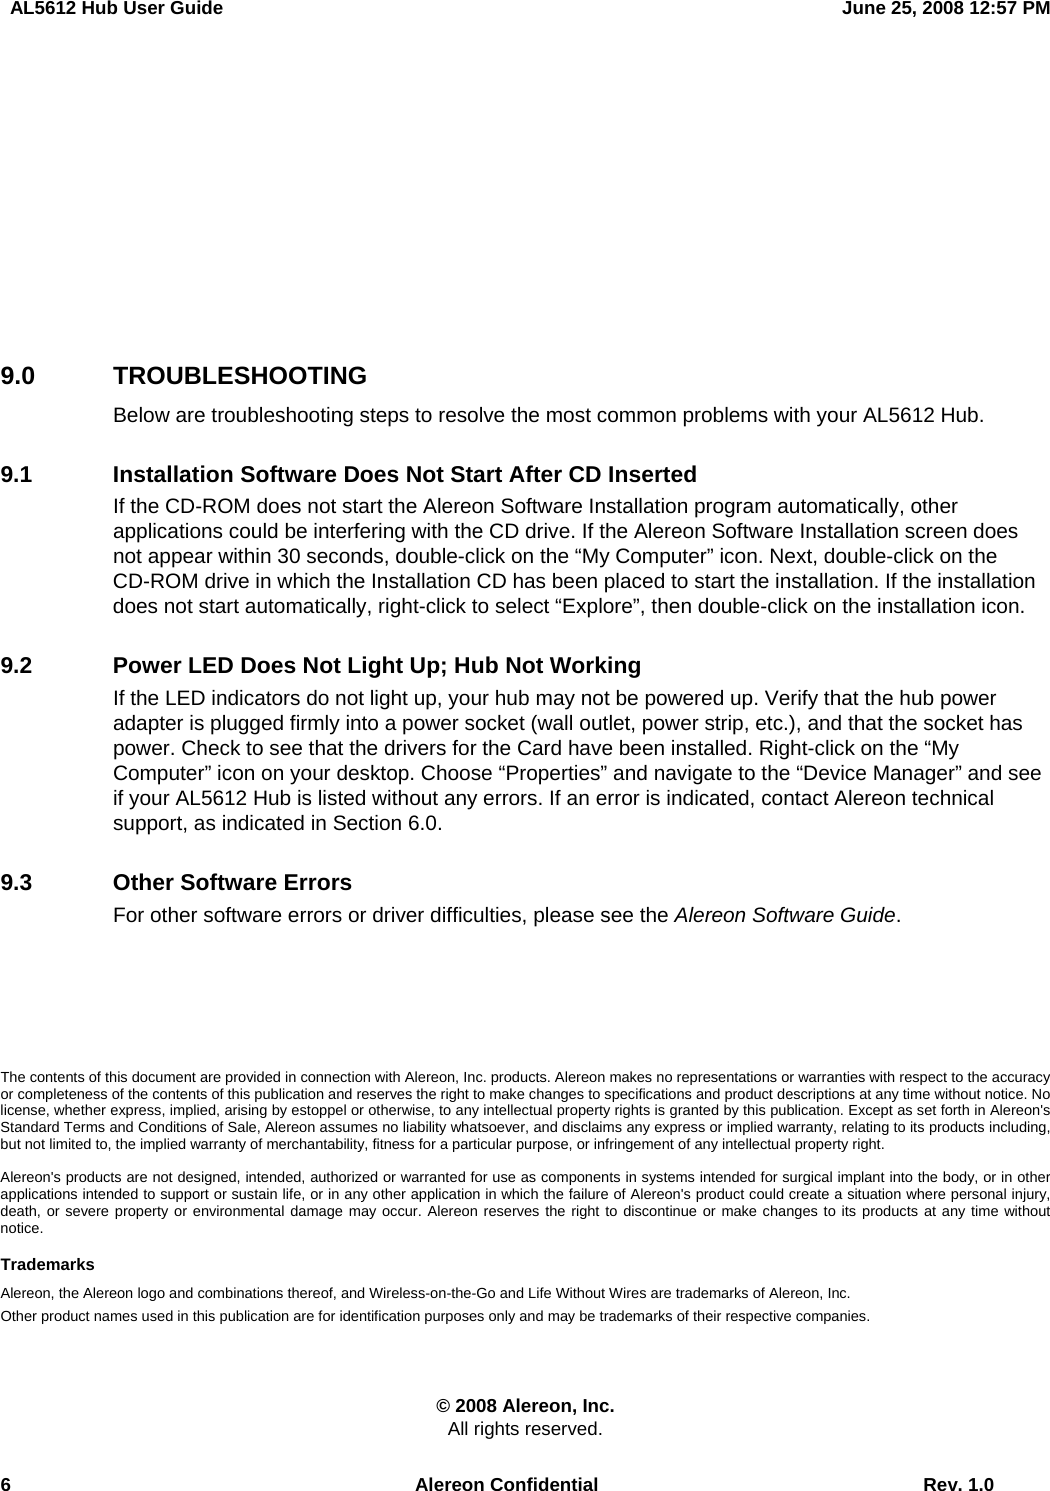   AL5612 Hub User Guide  June 25, 2008 12:57 PM 6  Alereon Confidential  Rev. 1.0        9.0 TROUBLESHOOTING Below are troubleshooting steps to resolve the most common problems with your AL5612 Hub. 9.1  Installation Software Does Not Start After CD Inserted If the CD-ROM does not start the Alereon Software Installation program automatically, other applications could be interfering with the CD drive. If the Alereon Software Installation screen does not appear within 30 seconds, double-click on the “My Computer” icon. Next, double-click on the CD-ROM drive in which the Installation CD has been placed to start the installation. If the installation does not start automatically, right-click to select “Explore”, then double-click on the installation icon. 9.2  Power LED Does Not Light Up; Hub Not Working If the LED indicators do not light up, your hub may not be powered up. Verify that the hub power adapter is plugged firmly into a power socket (wall outlet, power strip, etc.), and that the socket has power. Check to see that the drivers for the Card have been installed. Right-click on the “My Computer” icon on your desktop. Choose “Properties” and navigate to the “Device Manager” and see if your AL5612 Hub is listed without any errors. If an error is indicated, contact Alereon technical support, as indicated in Section 6.0. 9.3  Other Software Errors For other software errors or driver difficulties, please see the Alereon Software Guide.     The contents of this document are provided in connection with Alereon, Inc. products. Alereon makes no representations or warranties with respect to the accuracy or completeness of the contents of this publication and reserves the right to make changes to specifications and product descriptions at any time without notice. No license, whether express, implied, arising by estoppel or otherwise, to any intellectual property rights is granted by this publication. Except as set forth in Alereon&apos;s Standard Terms and Conditions of Sale, Alereon assumes no liability whatsoever, and disclaims any express or implied warranty, relating to its products including, but not limited to, the implied warranty of merchantability, fitness for a particular purpose, or infringement of any intellectual property right.  Alereon&apos;s products are not designed, intended, authorized or warranted for use as components in systems intended for surgical implant into the body, or in other applications intended to support or sustain life, or in any other application in which the failure of Alereon&apos;s product could create a situation where personal injury, death, or severe property or environmental damage may occur. Alereon reserves the right to discontinue or make changes to its products at any time without notice.  Trademarks Alereon, the Alereon logo and combinations thereof, and Wireless-on-the-Go and Life Without Wires are trademarks of Alereon, Inc. Other product names used in this publication are for identification purposes only and may be trademarks of their respective companies.  © 2008 Alereon, Inc. All rights reserved. 